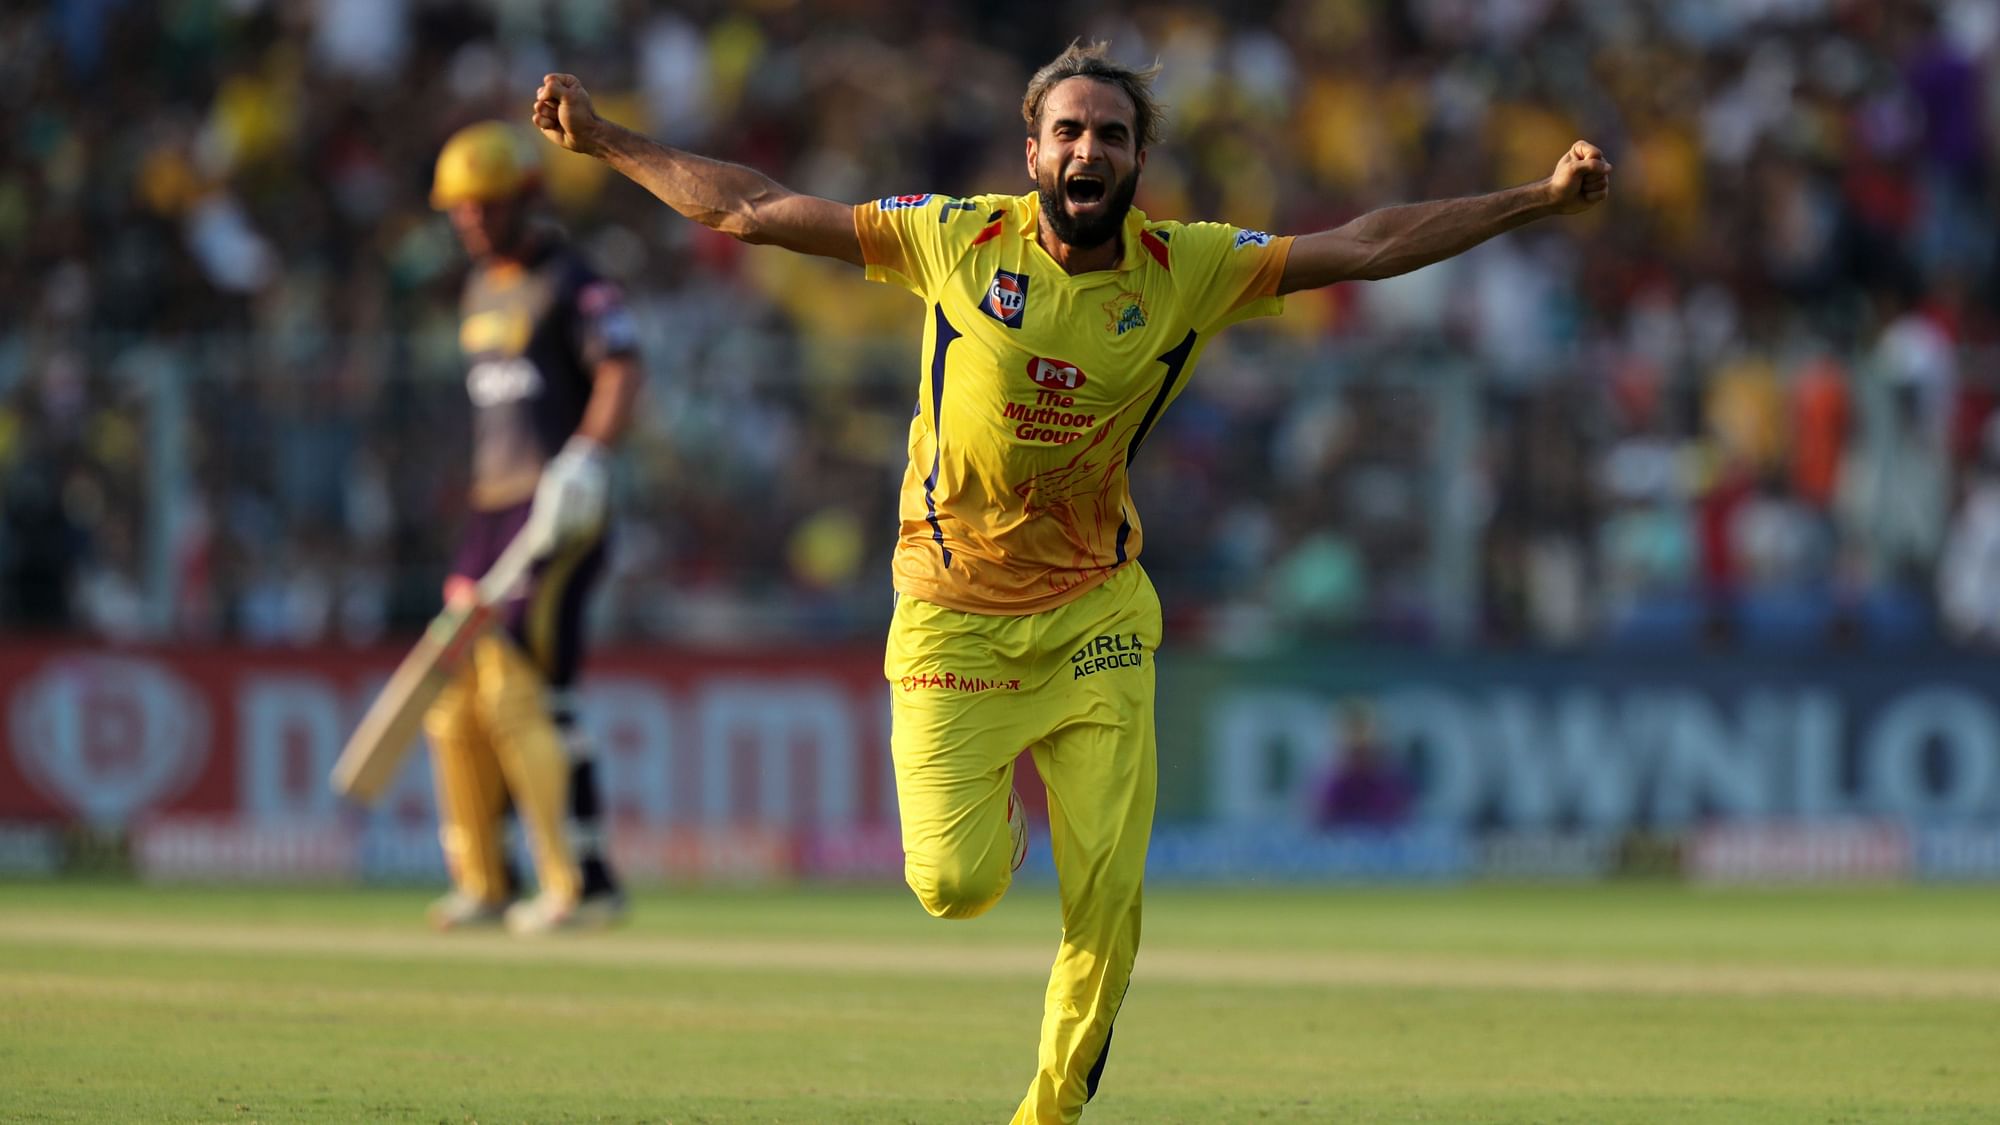 Imran Tahir’s bowling had such devastating effect that KKR managed just 29 runs from last five overs.